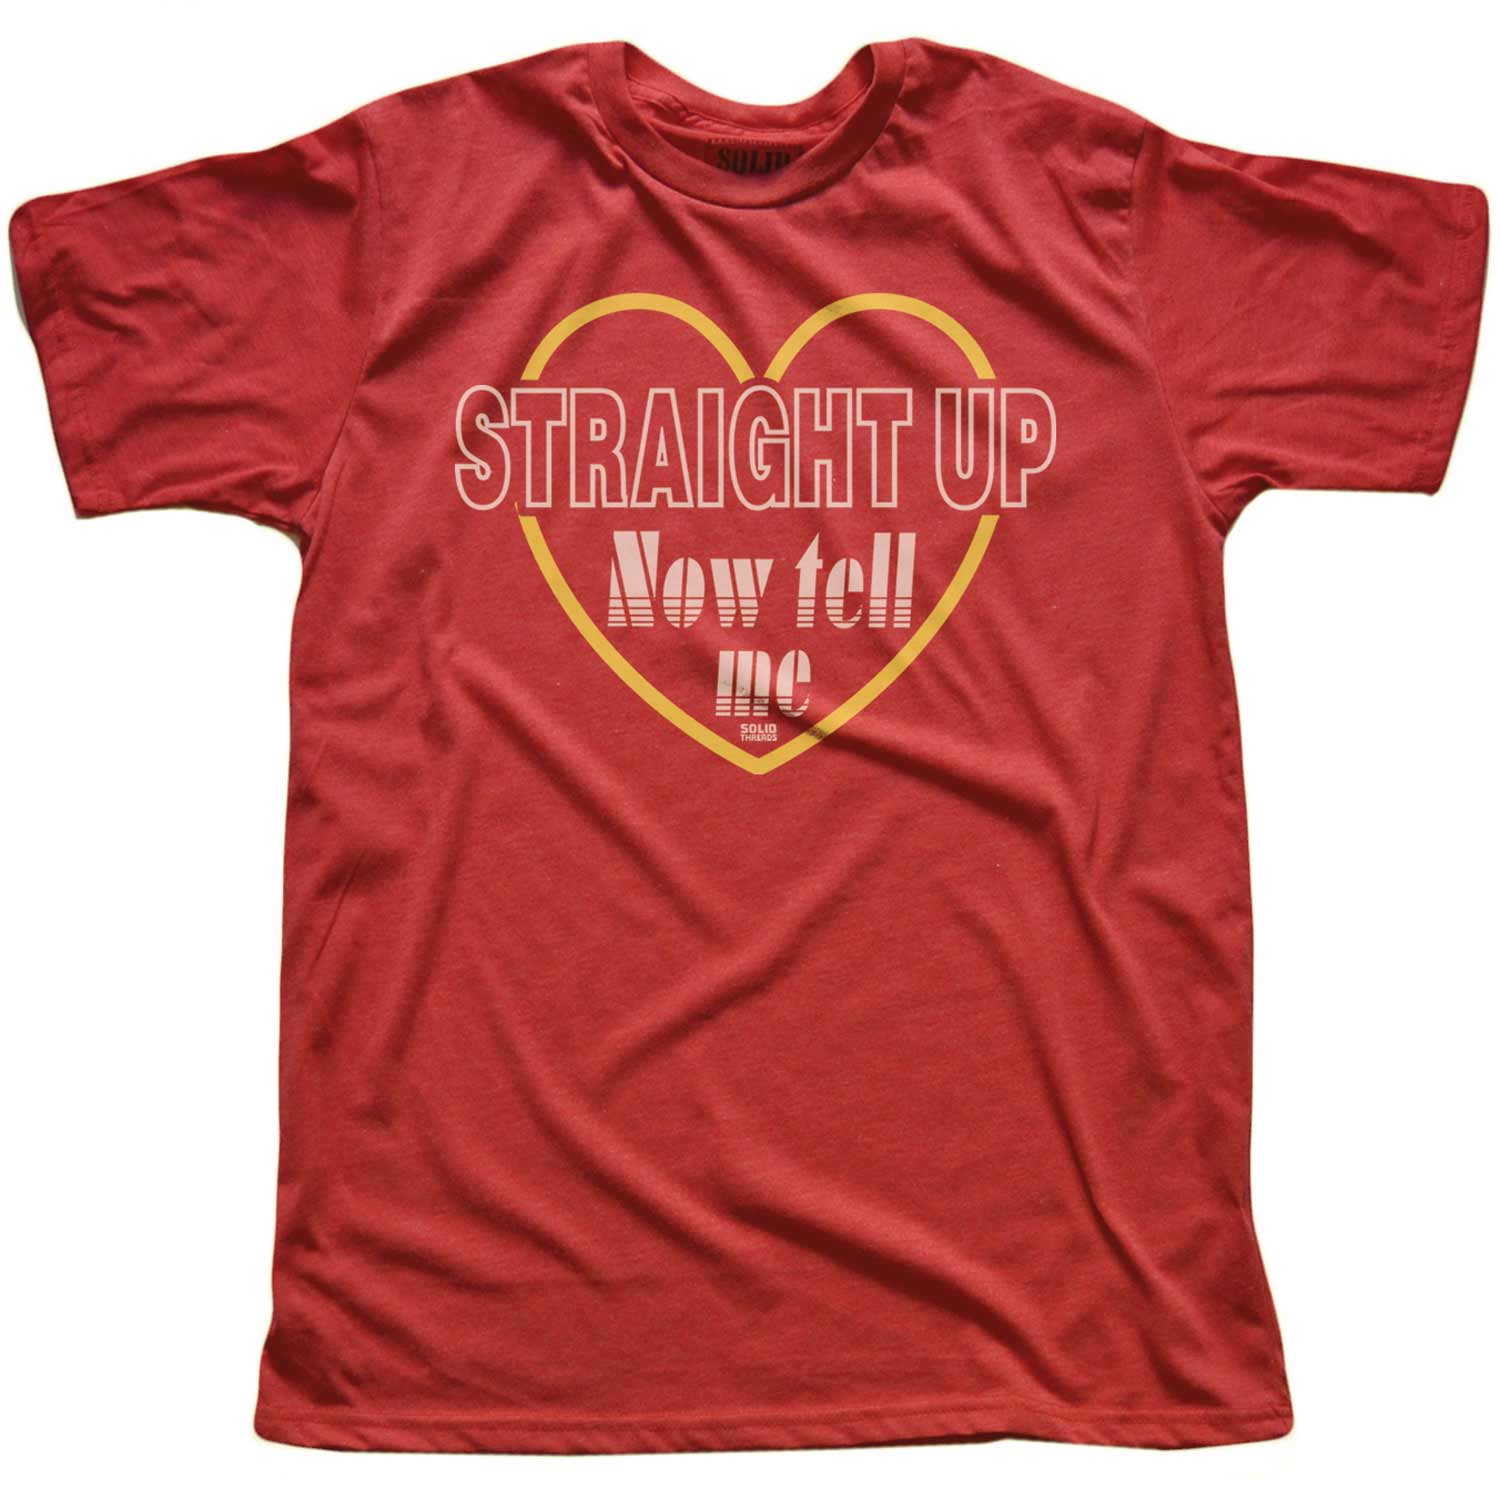 Men's Straight Up Now Tell Me Vintage Graphic Tee | Cool 80s Paula Abdul T-shirt | Solid Threads